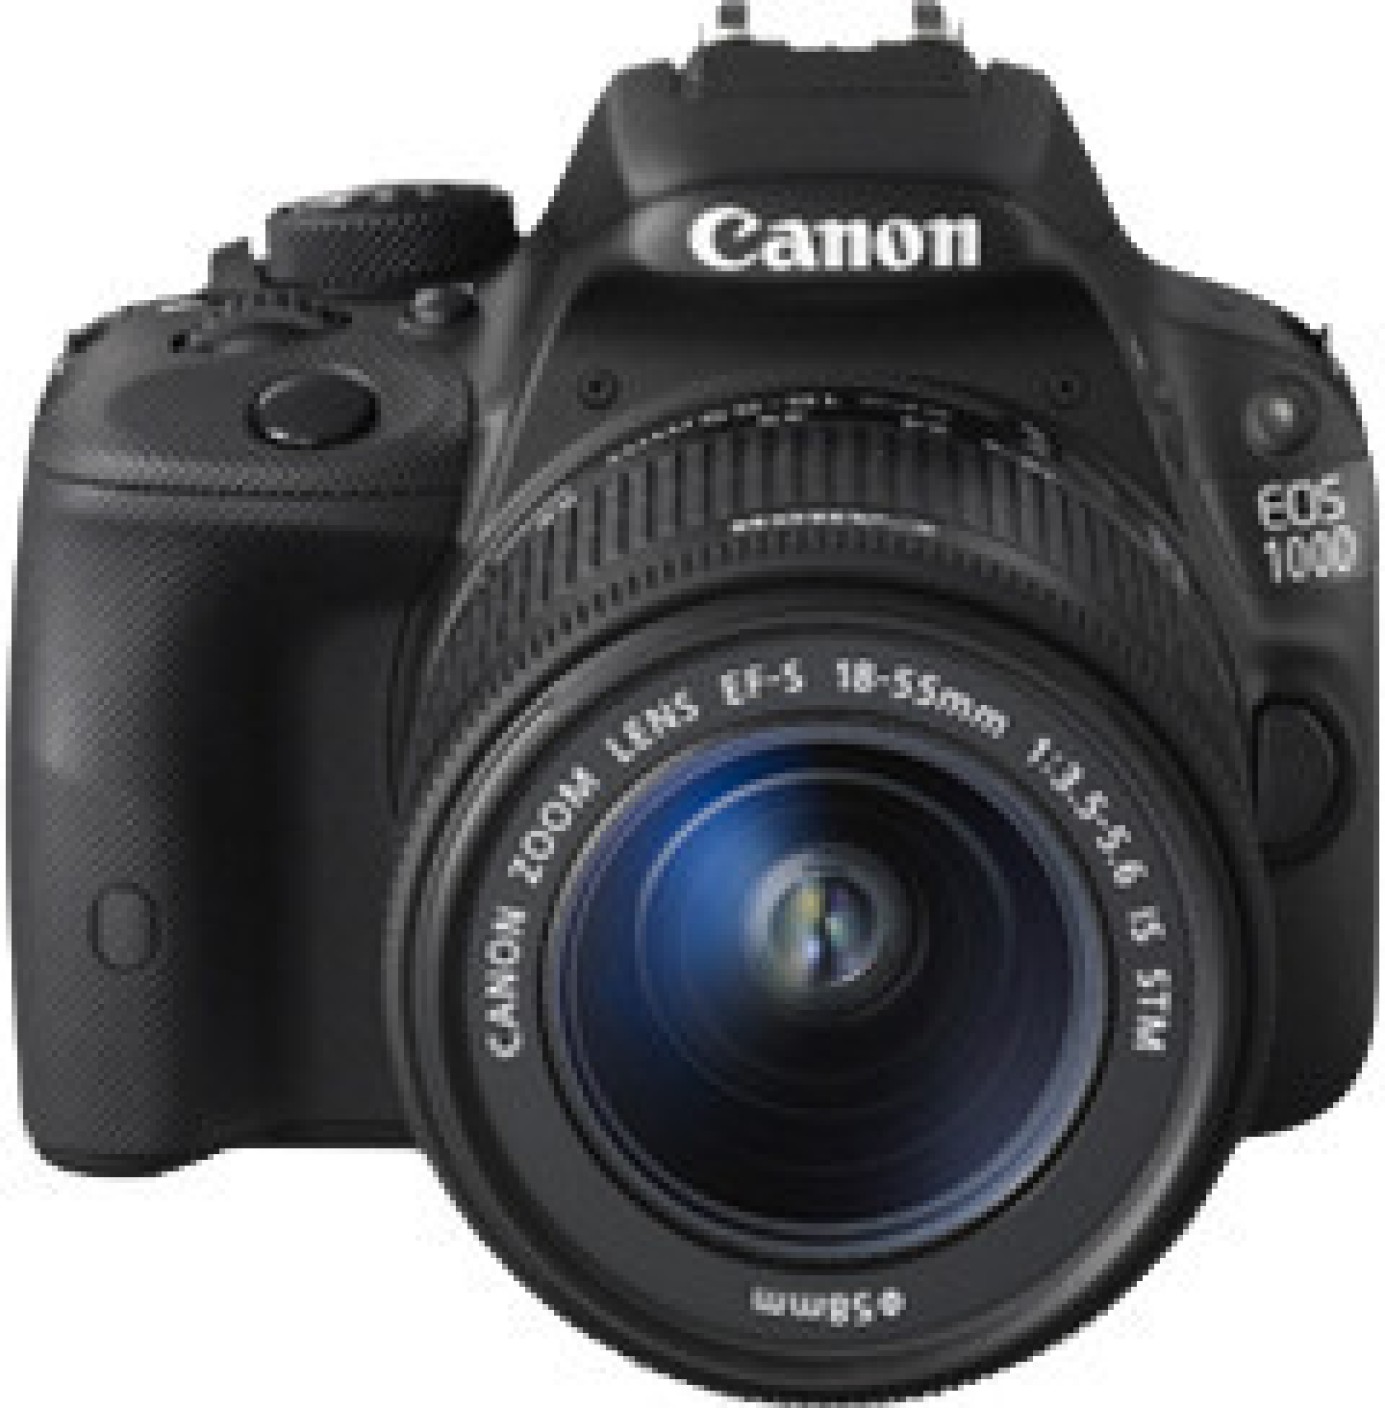 0 | Buy Canon EOS 100D (Body with 18-55 mm Lens) DSLR Camera Online at best Prices In ...